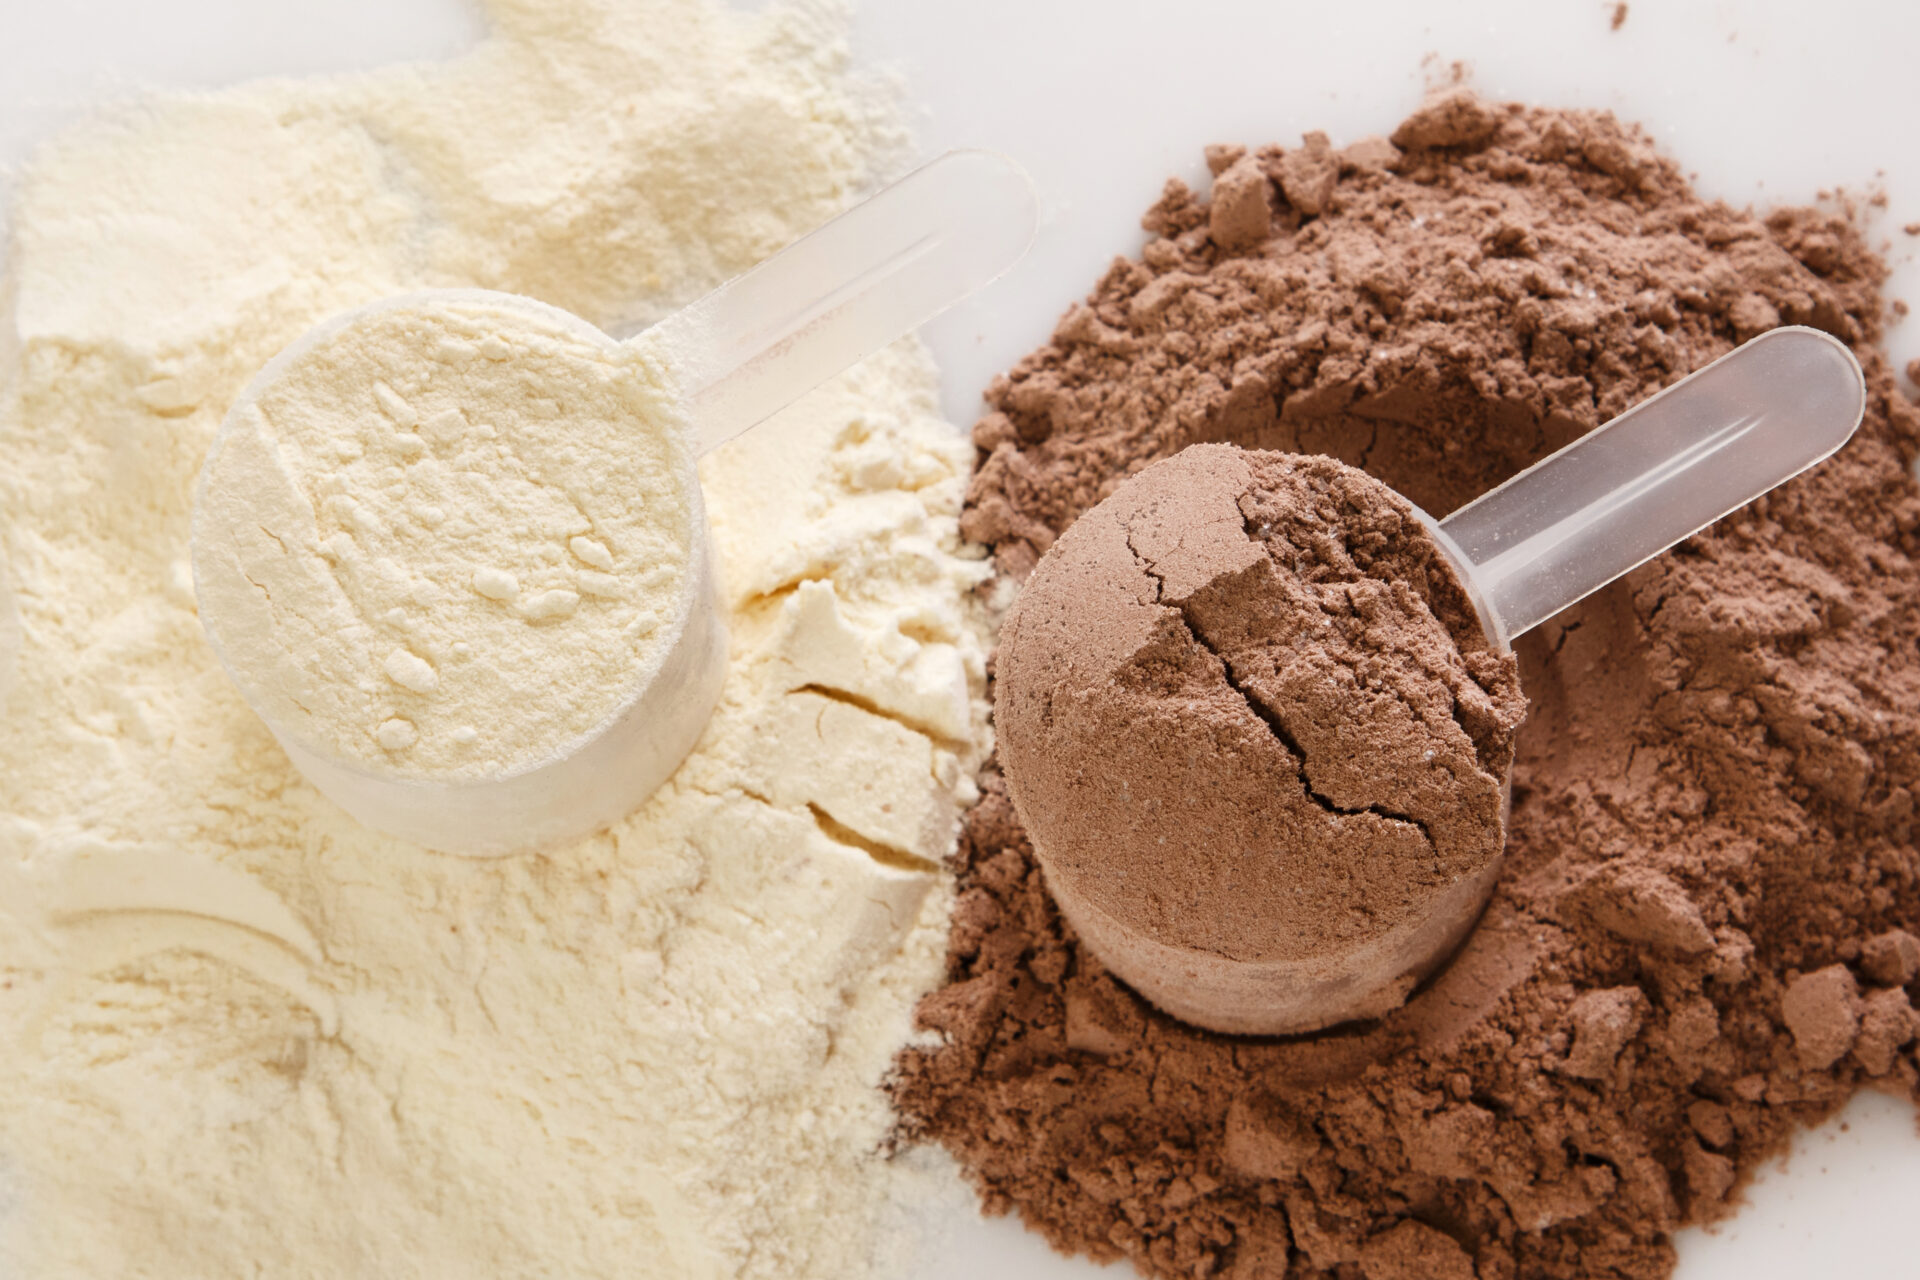 Bone Broth Protein Powder Market Latest Trends and Analysis, Future Growth Study by 2032